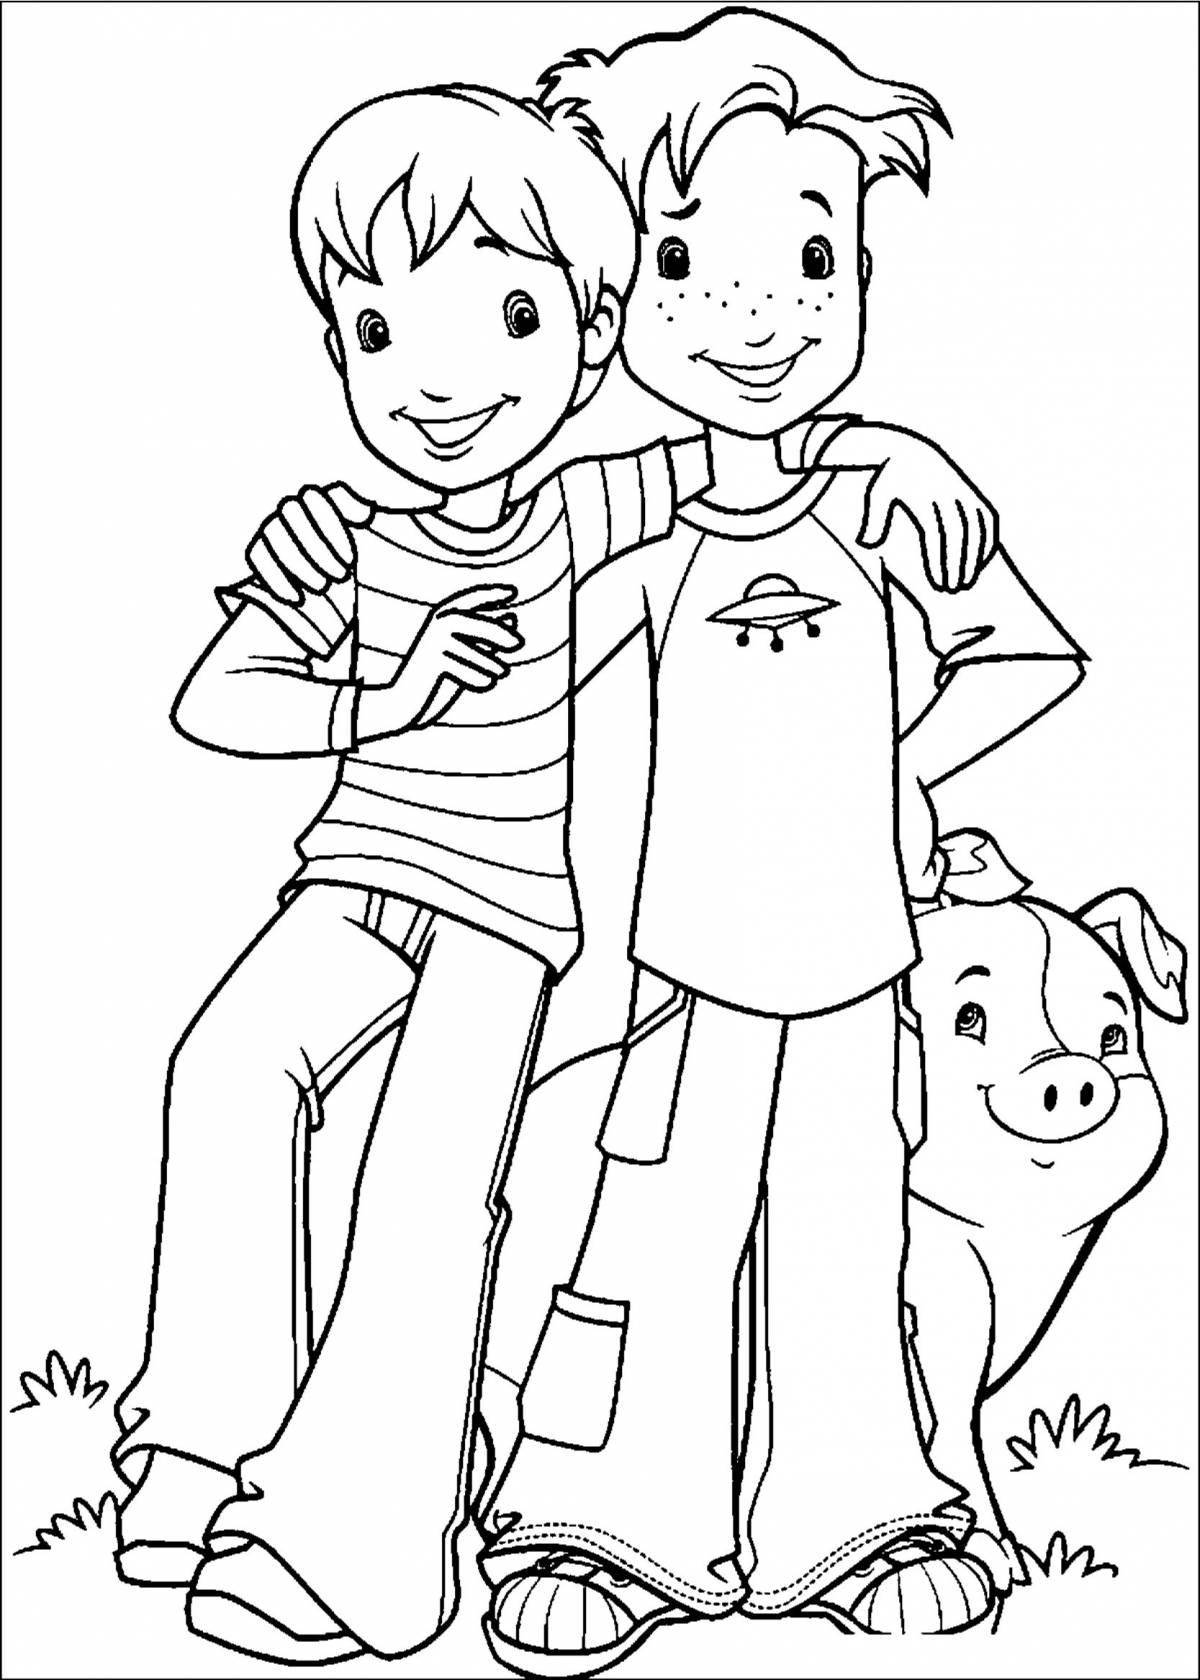 Adorable friends coloring pages for kids